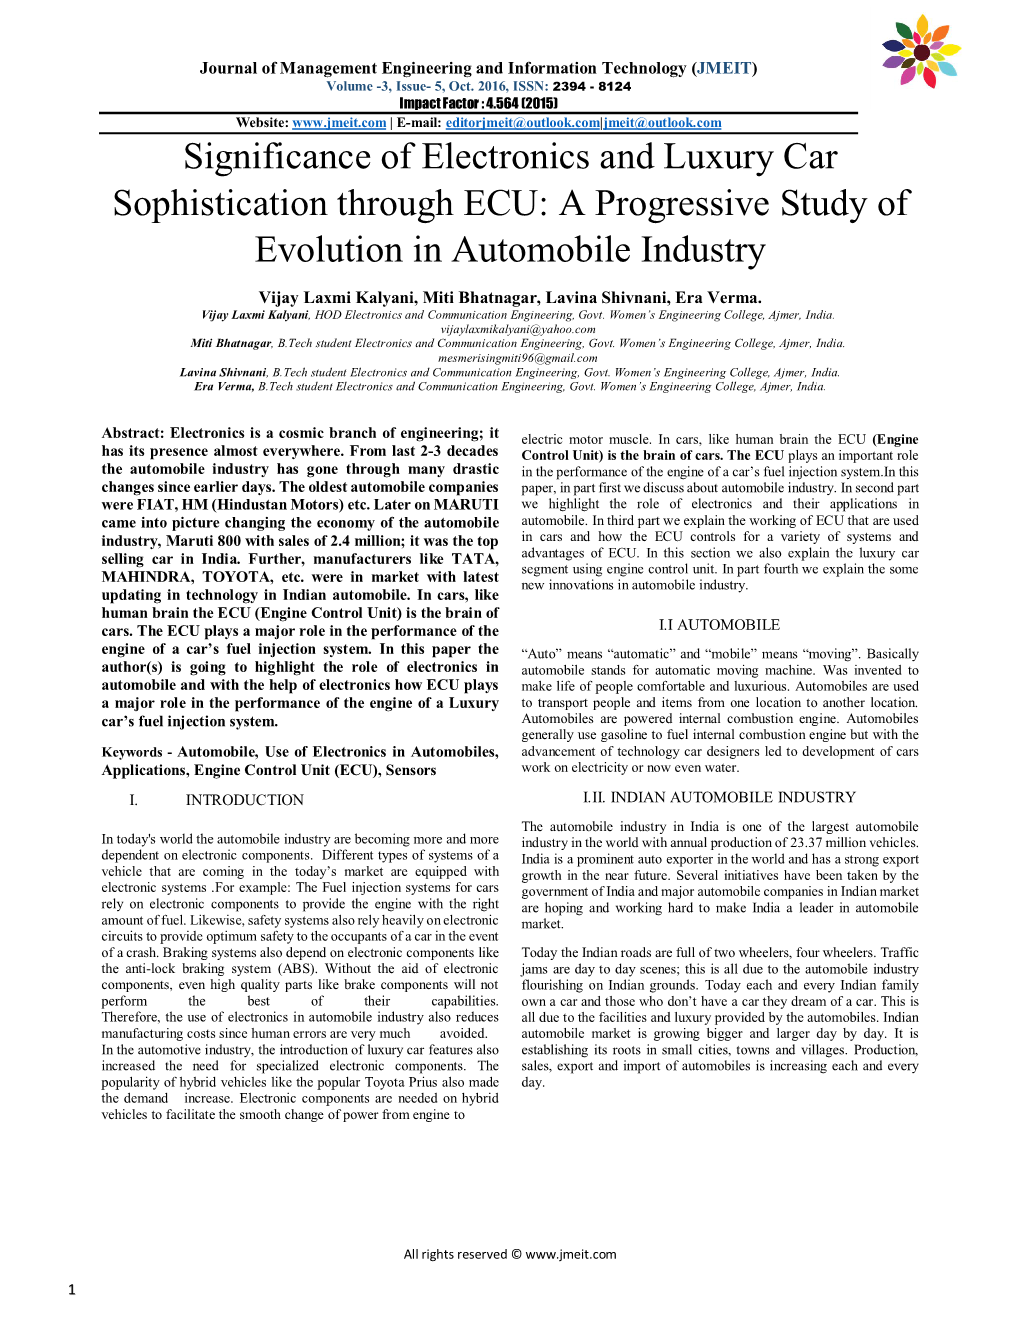 Significance of Electronics and Luxury Car Sophistication Through ECU: a Progressive Study of Evolution in Automobile Industry